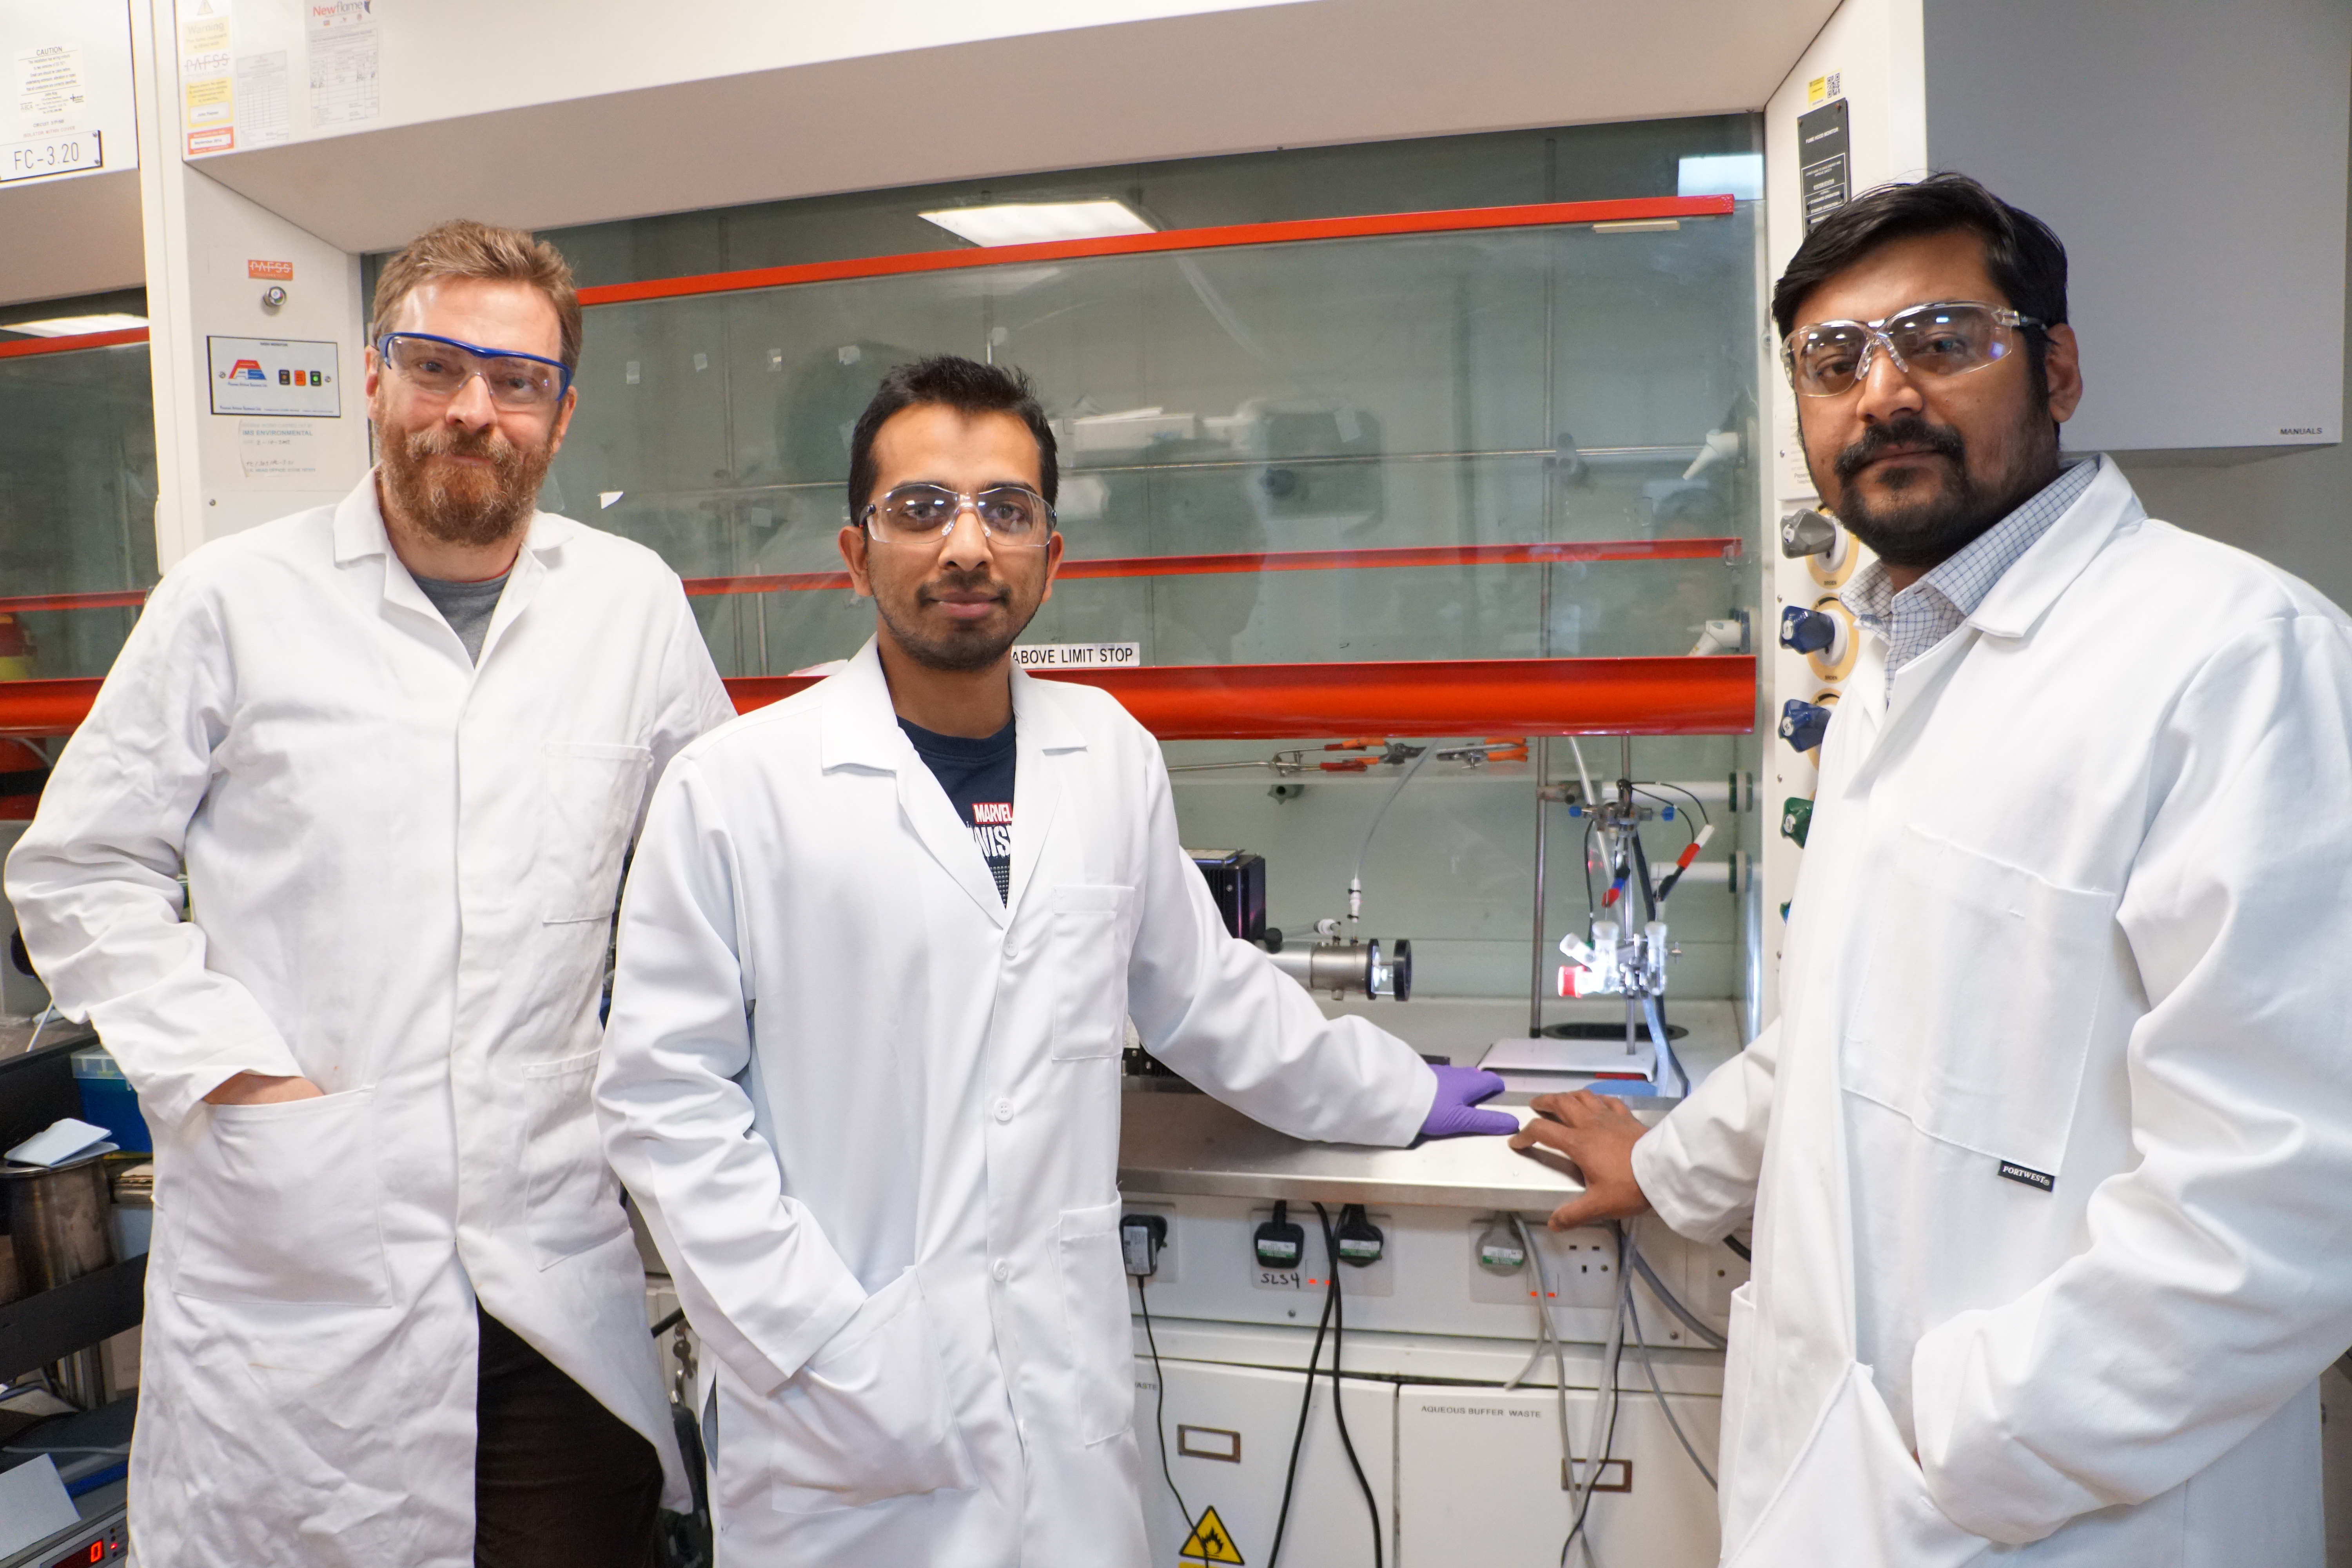 (From left) Professor Erwin Reisner, Subhajit Bhattacharjee and Dr Motiar Rahaman with the solar reactor that can simultaneously convert carbon dioxide into clean fuels and upcycle plastics into glycolic acid, a useful organic chemical for skincare creams.